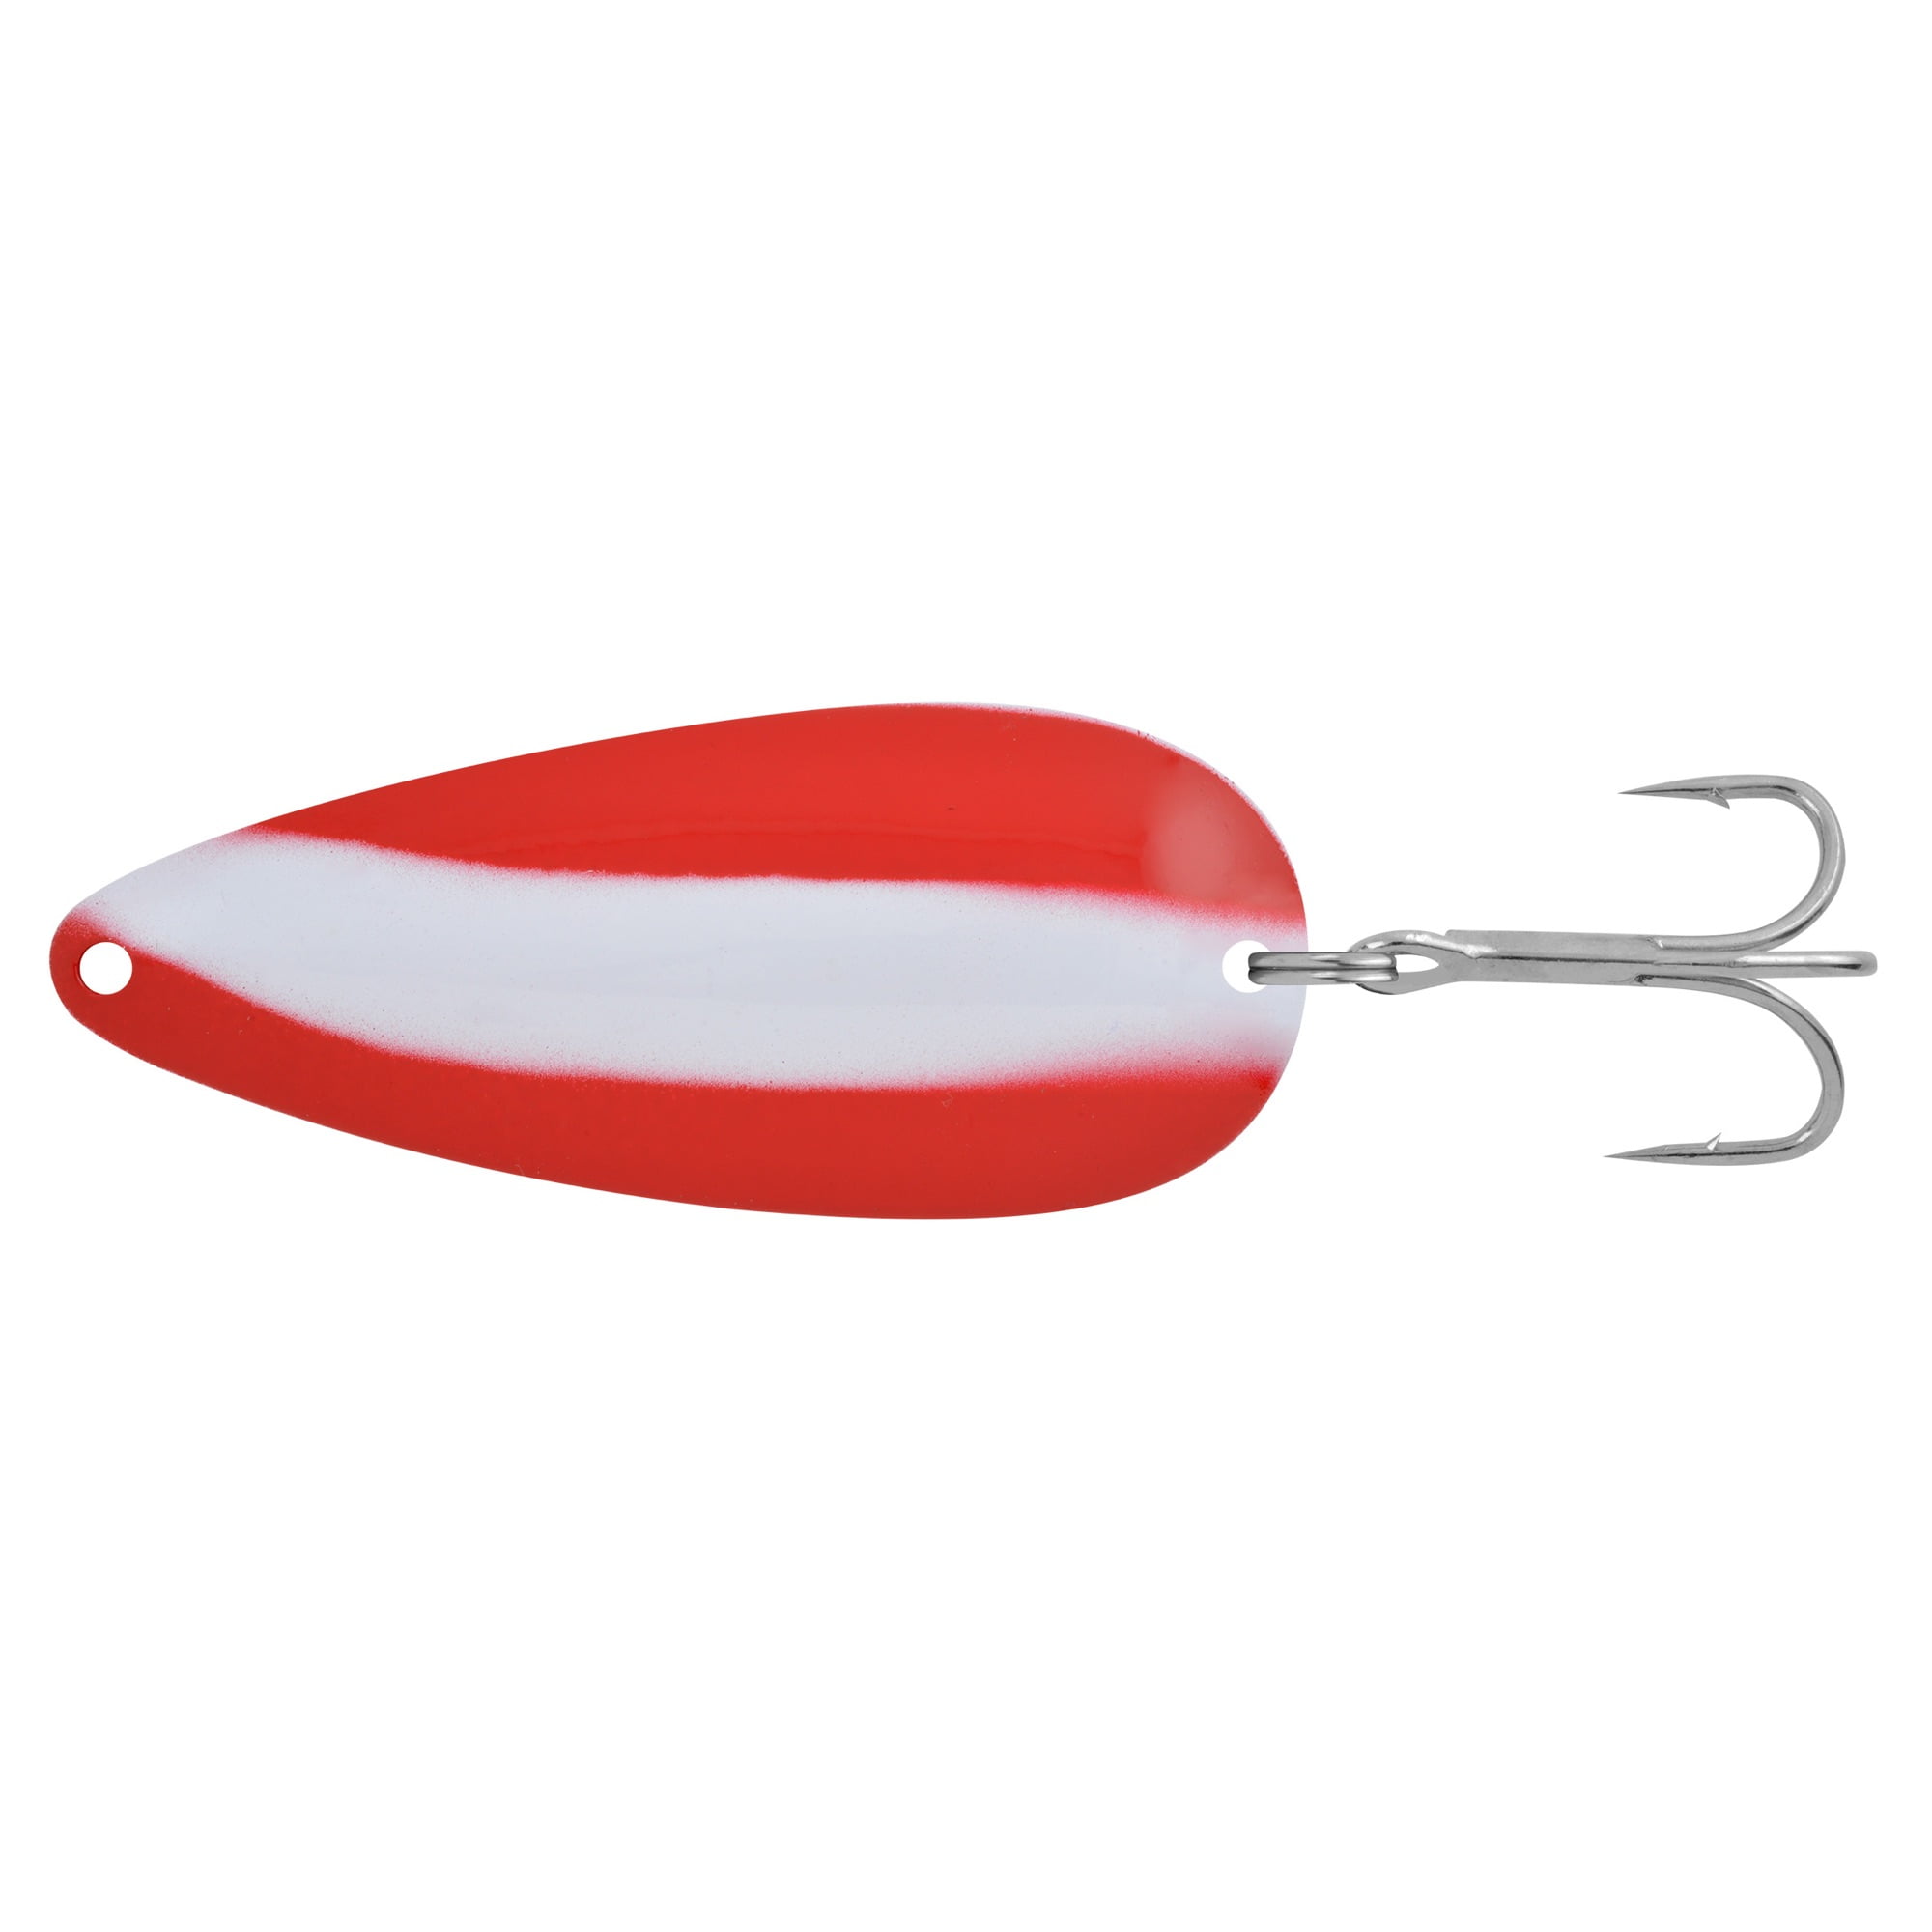 Apex Tackle Gamefish Spoon Red/White 5/8 oz., Fishing Spoons 